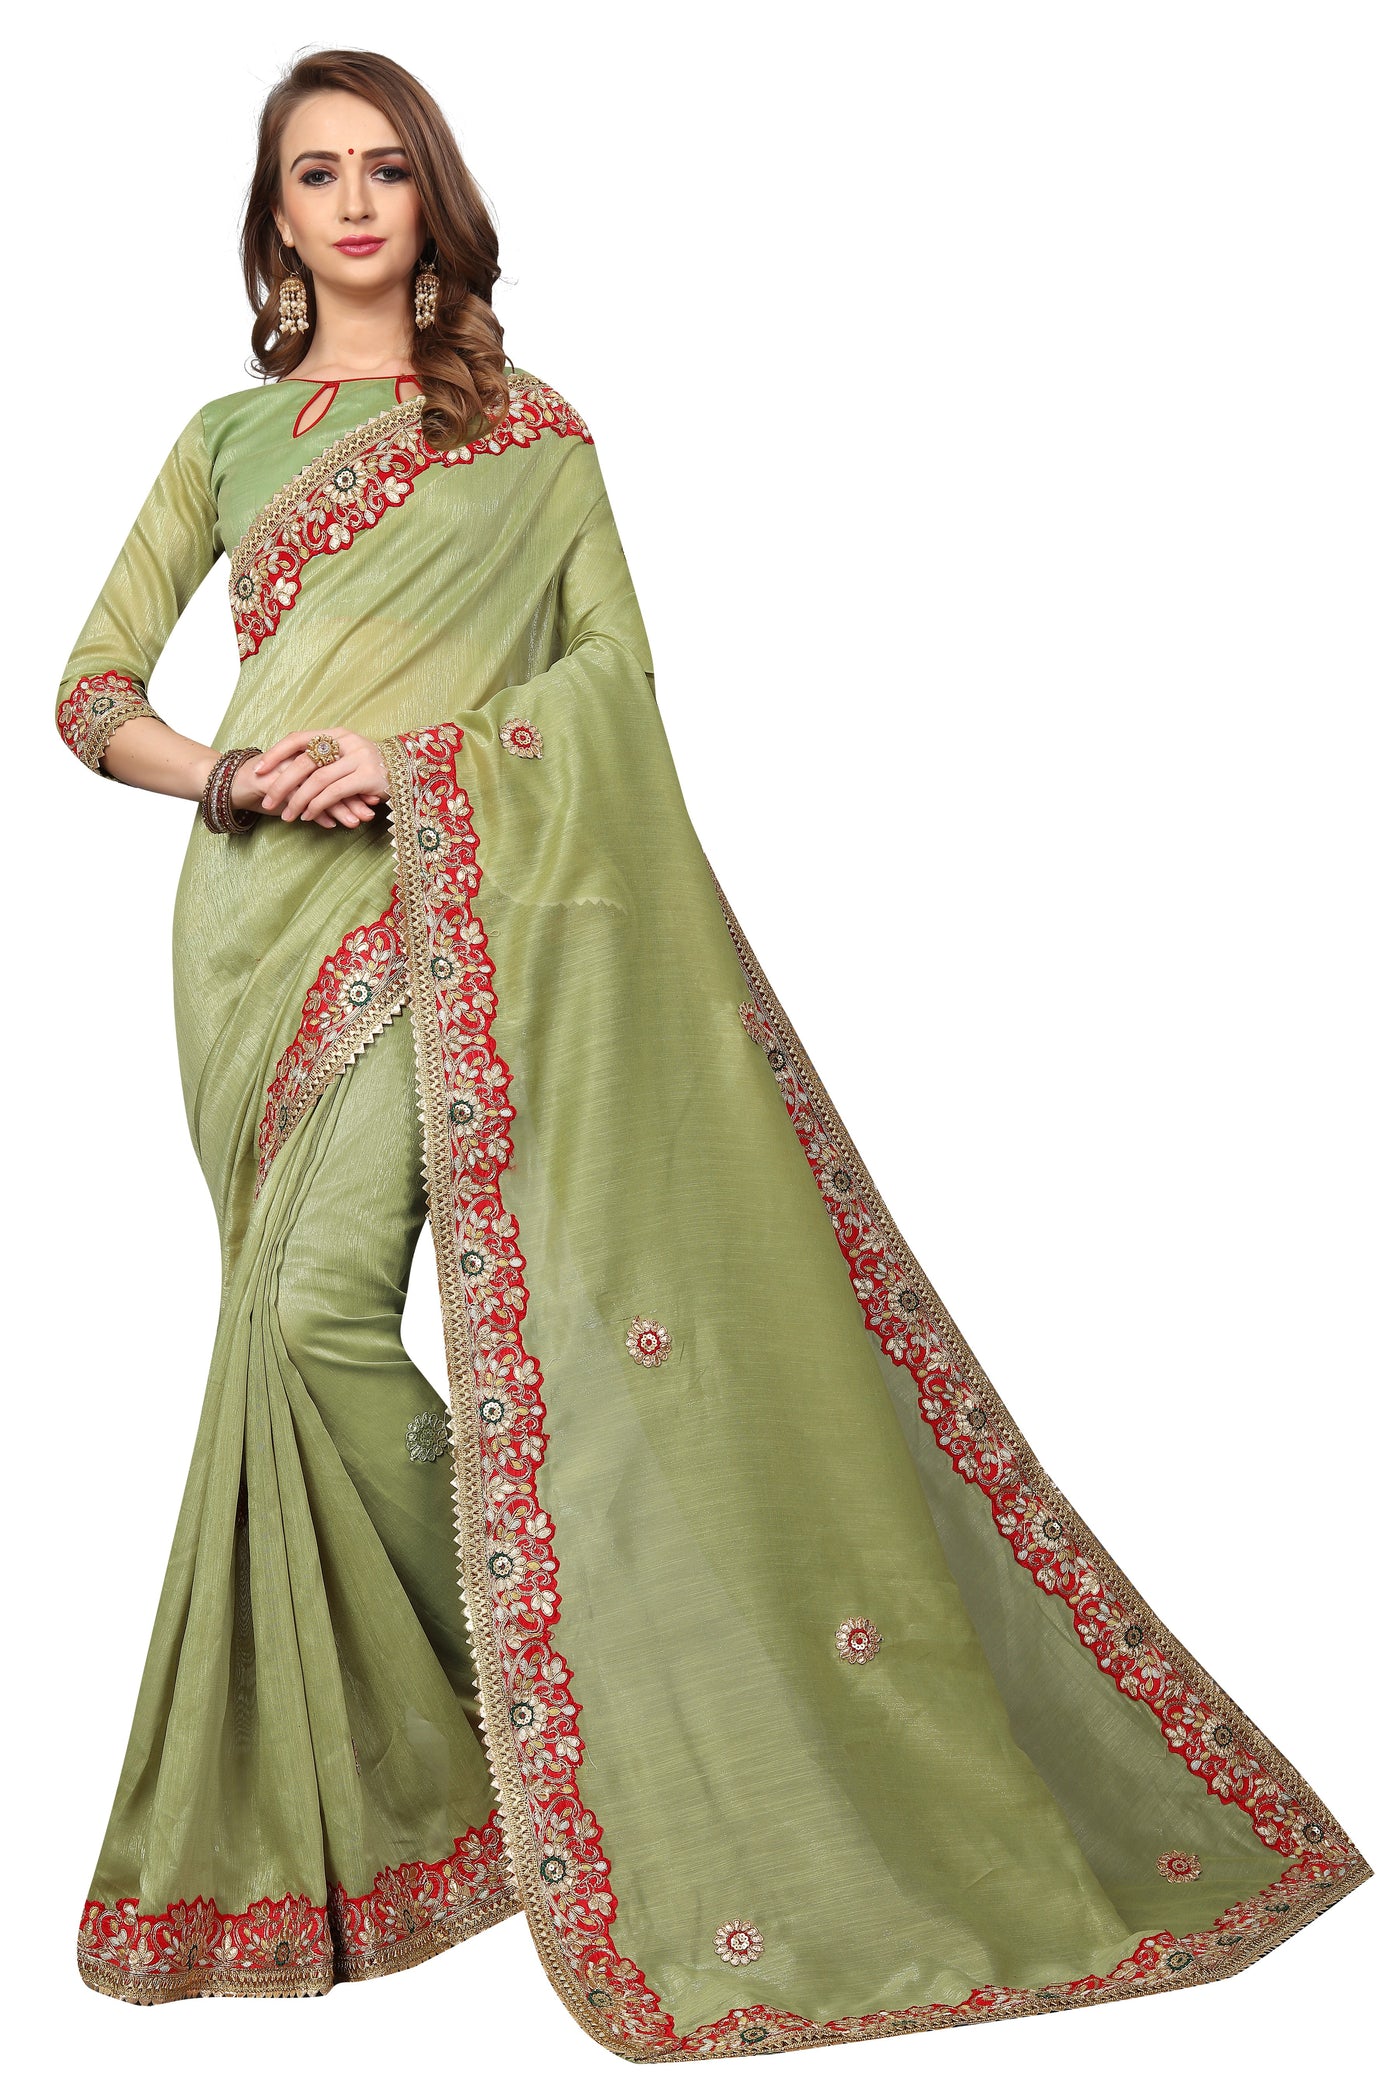 Cotton Silk Olive Green Saree With Blouse